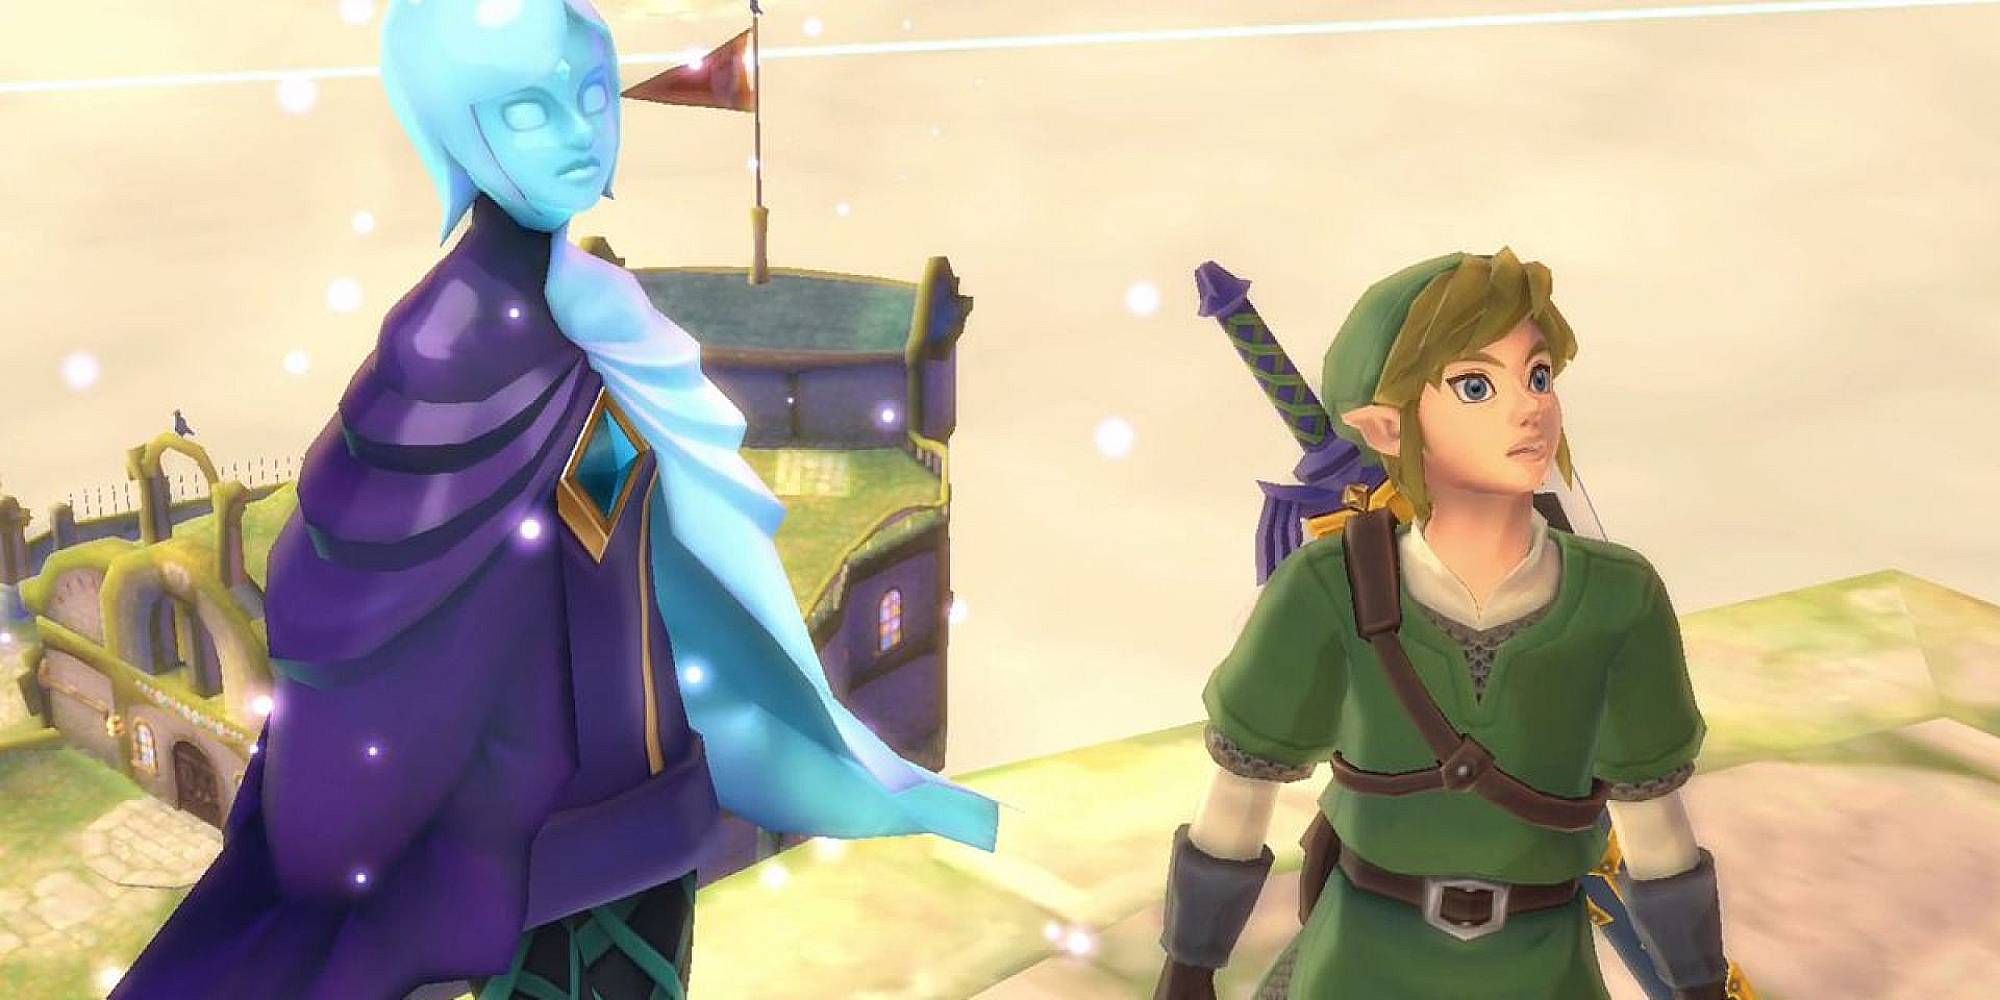 Link and Fi both look up at something off-camera